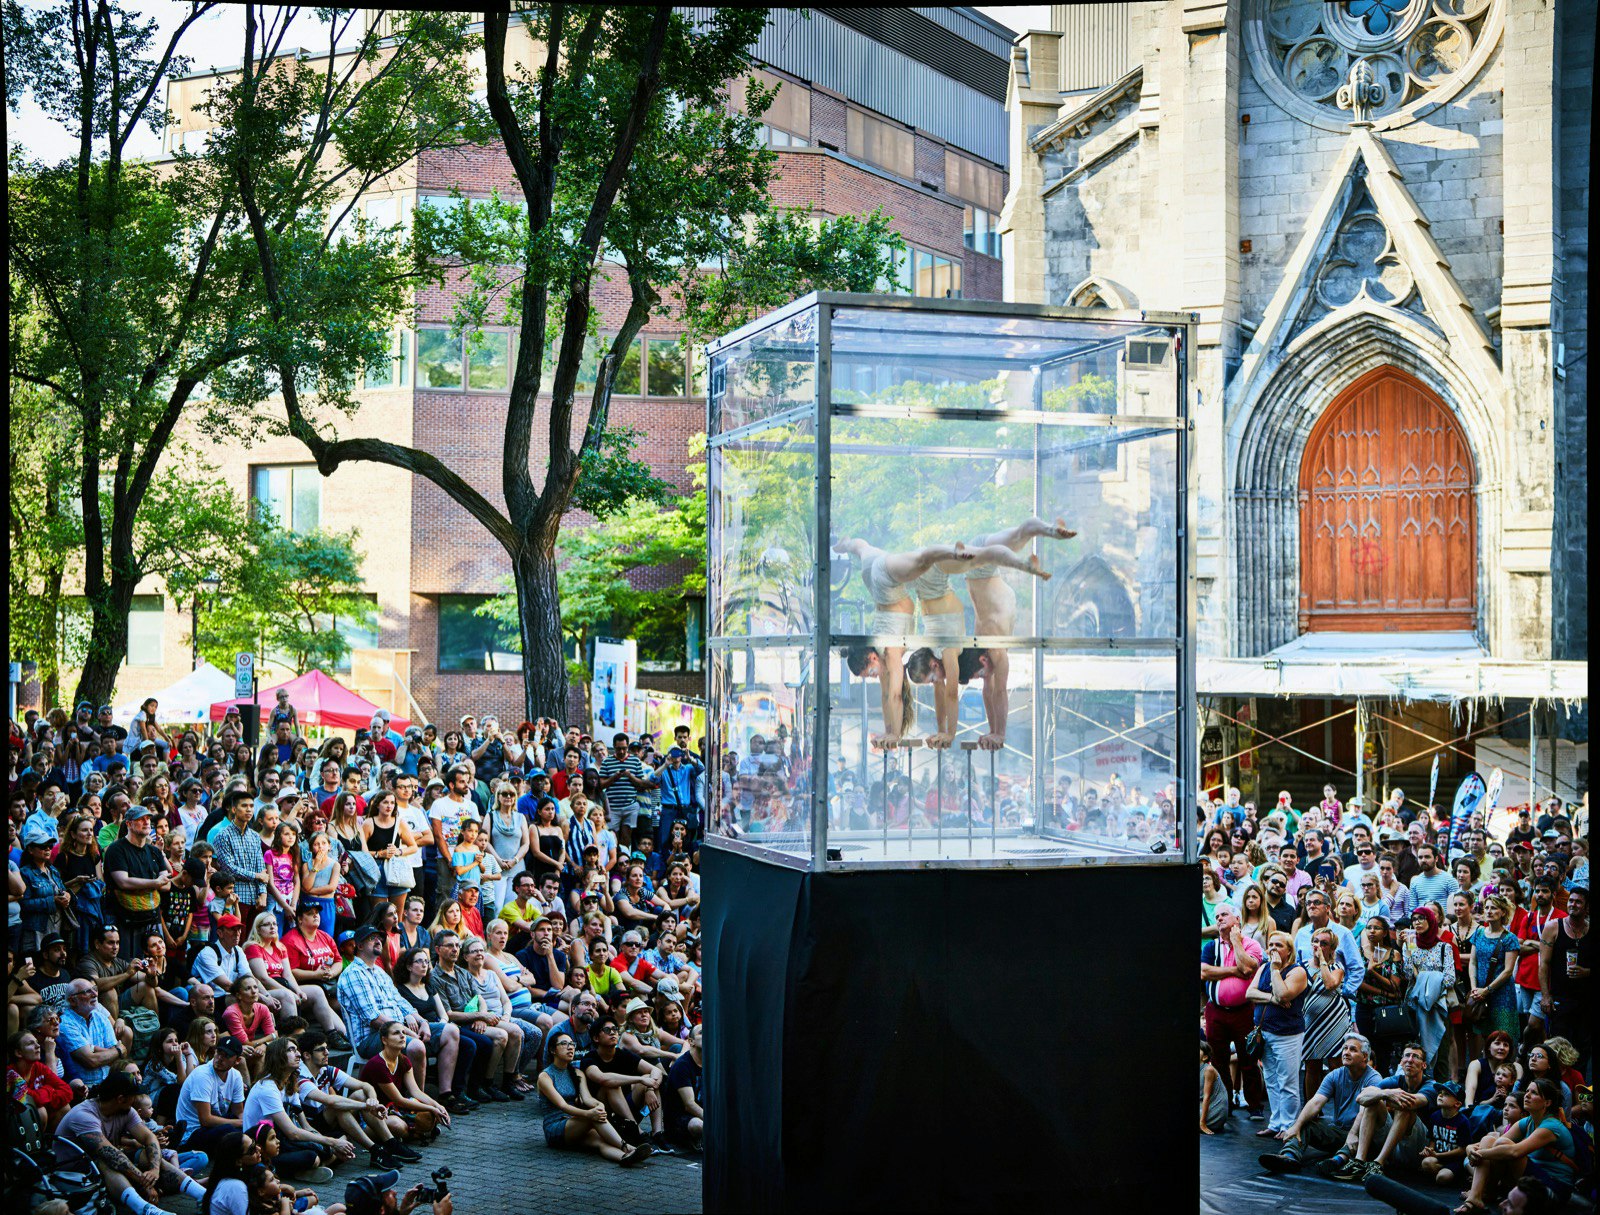 Three circus acrobat/contortionists balance on their hands on small stands inside a clear box on a pedestal, surrounded by spectators in Montreal